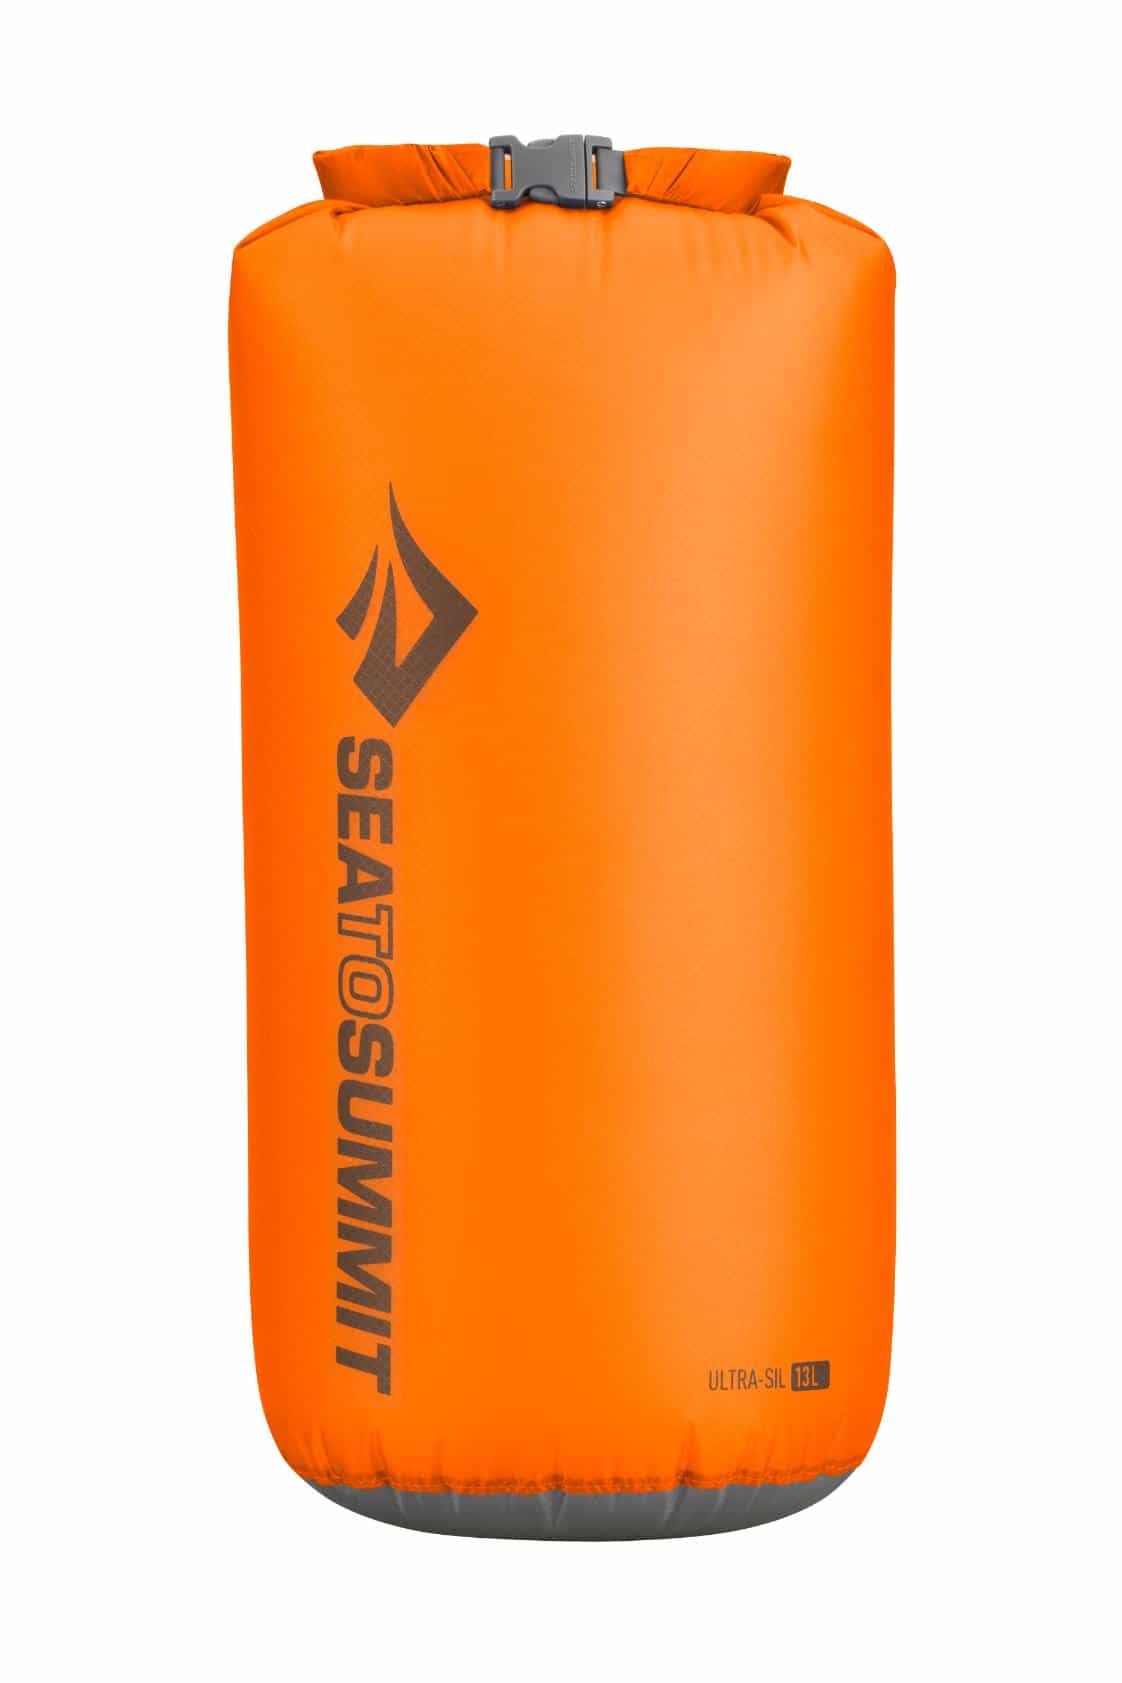 band Fruitig Meting Sea to Summit Ultra-Sil Dry Sack- 13L • Wanderlust Outfitters™